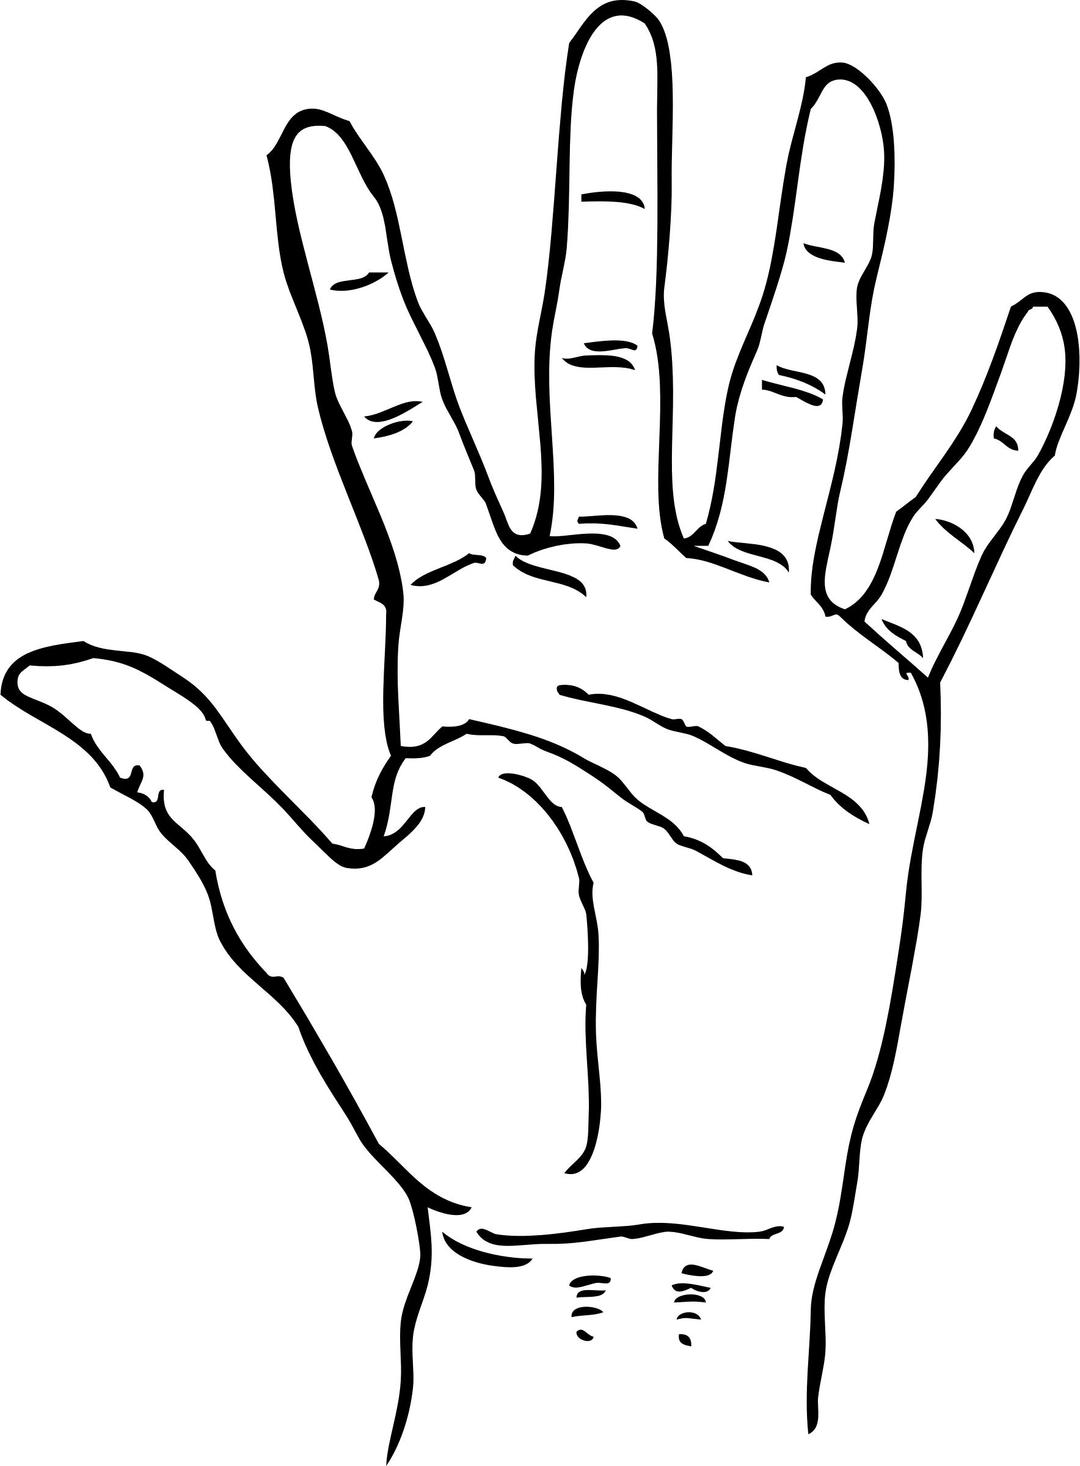 hand - palm facing out png transparent